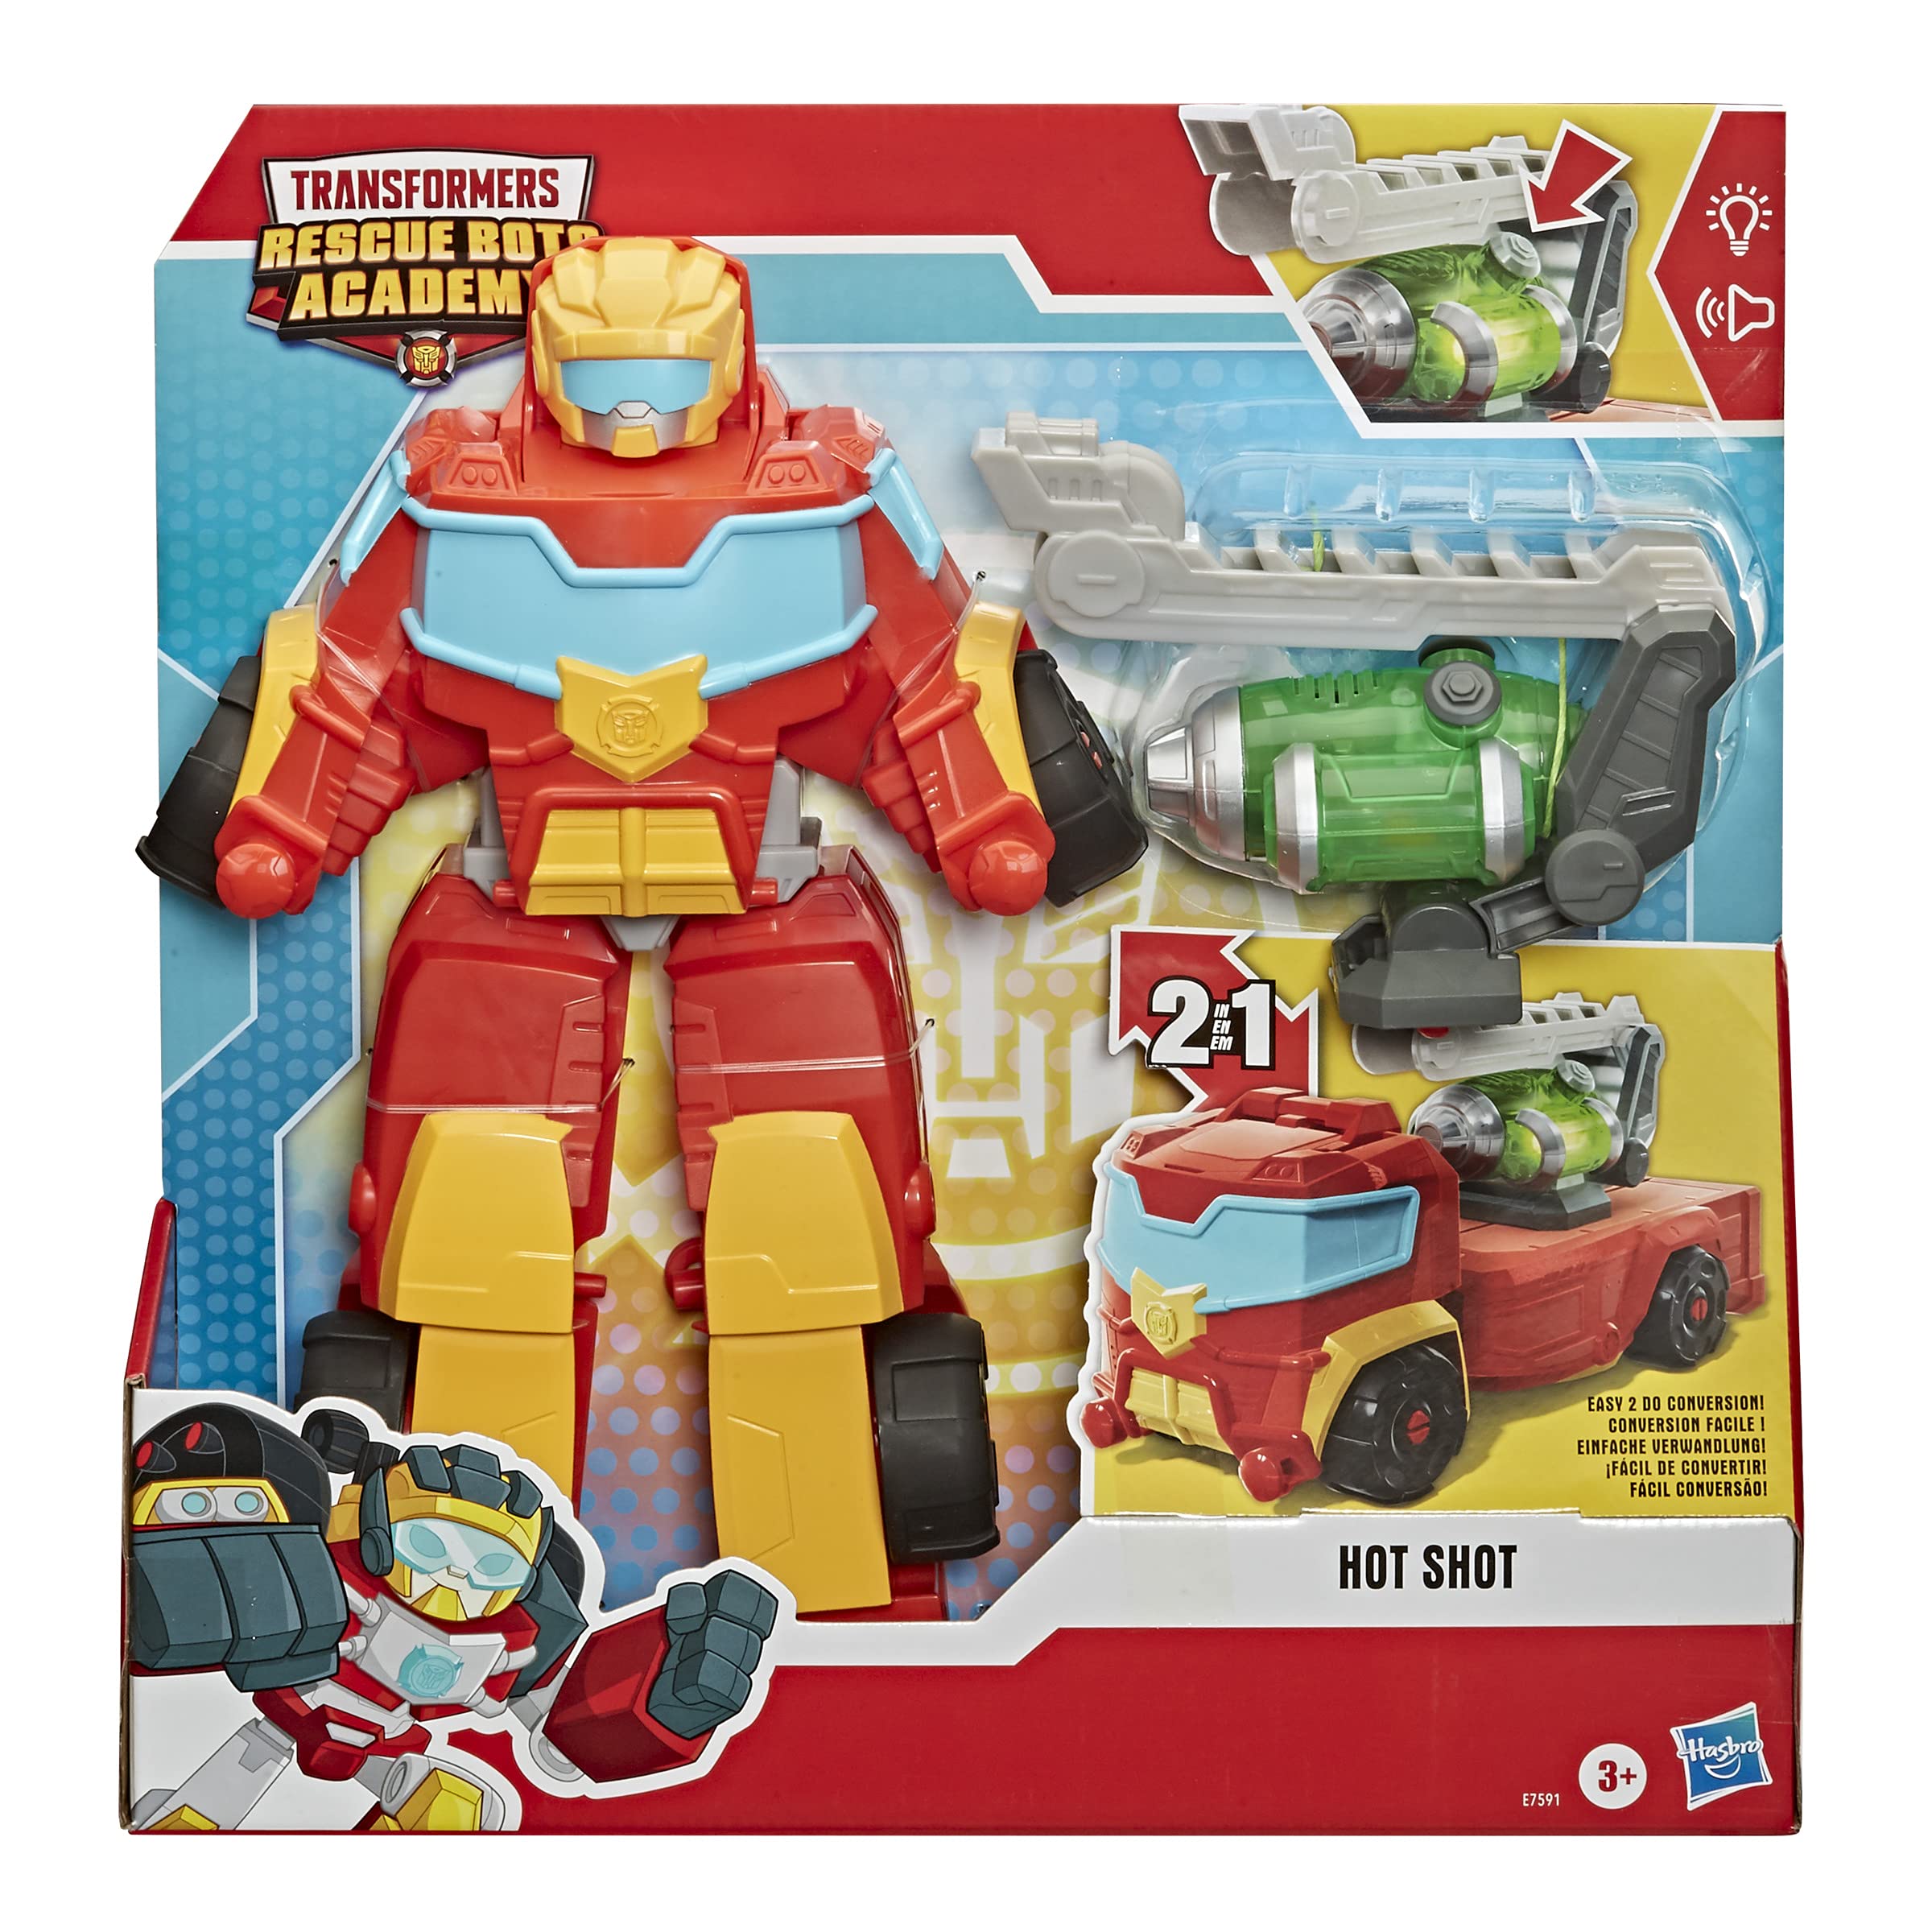 Transformers Playskool Heroes Rescue Bots Academy Rescue Power Hot Shot Converting Toy Robot, 14-Inch Collectible Action Figure Toy for Kids Ages 3 and Up